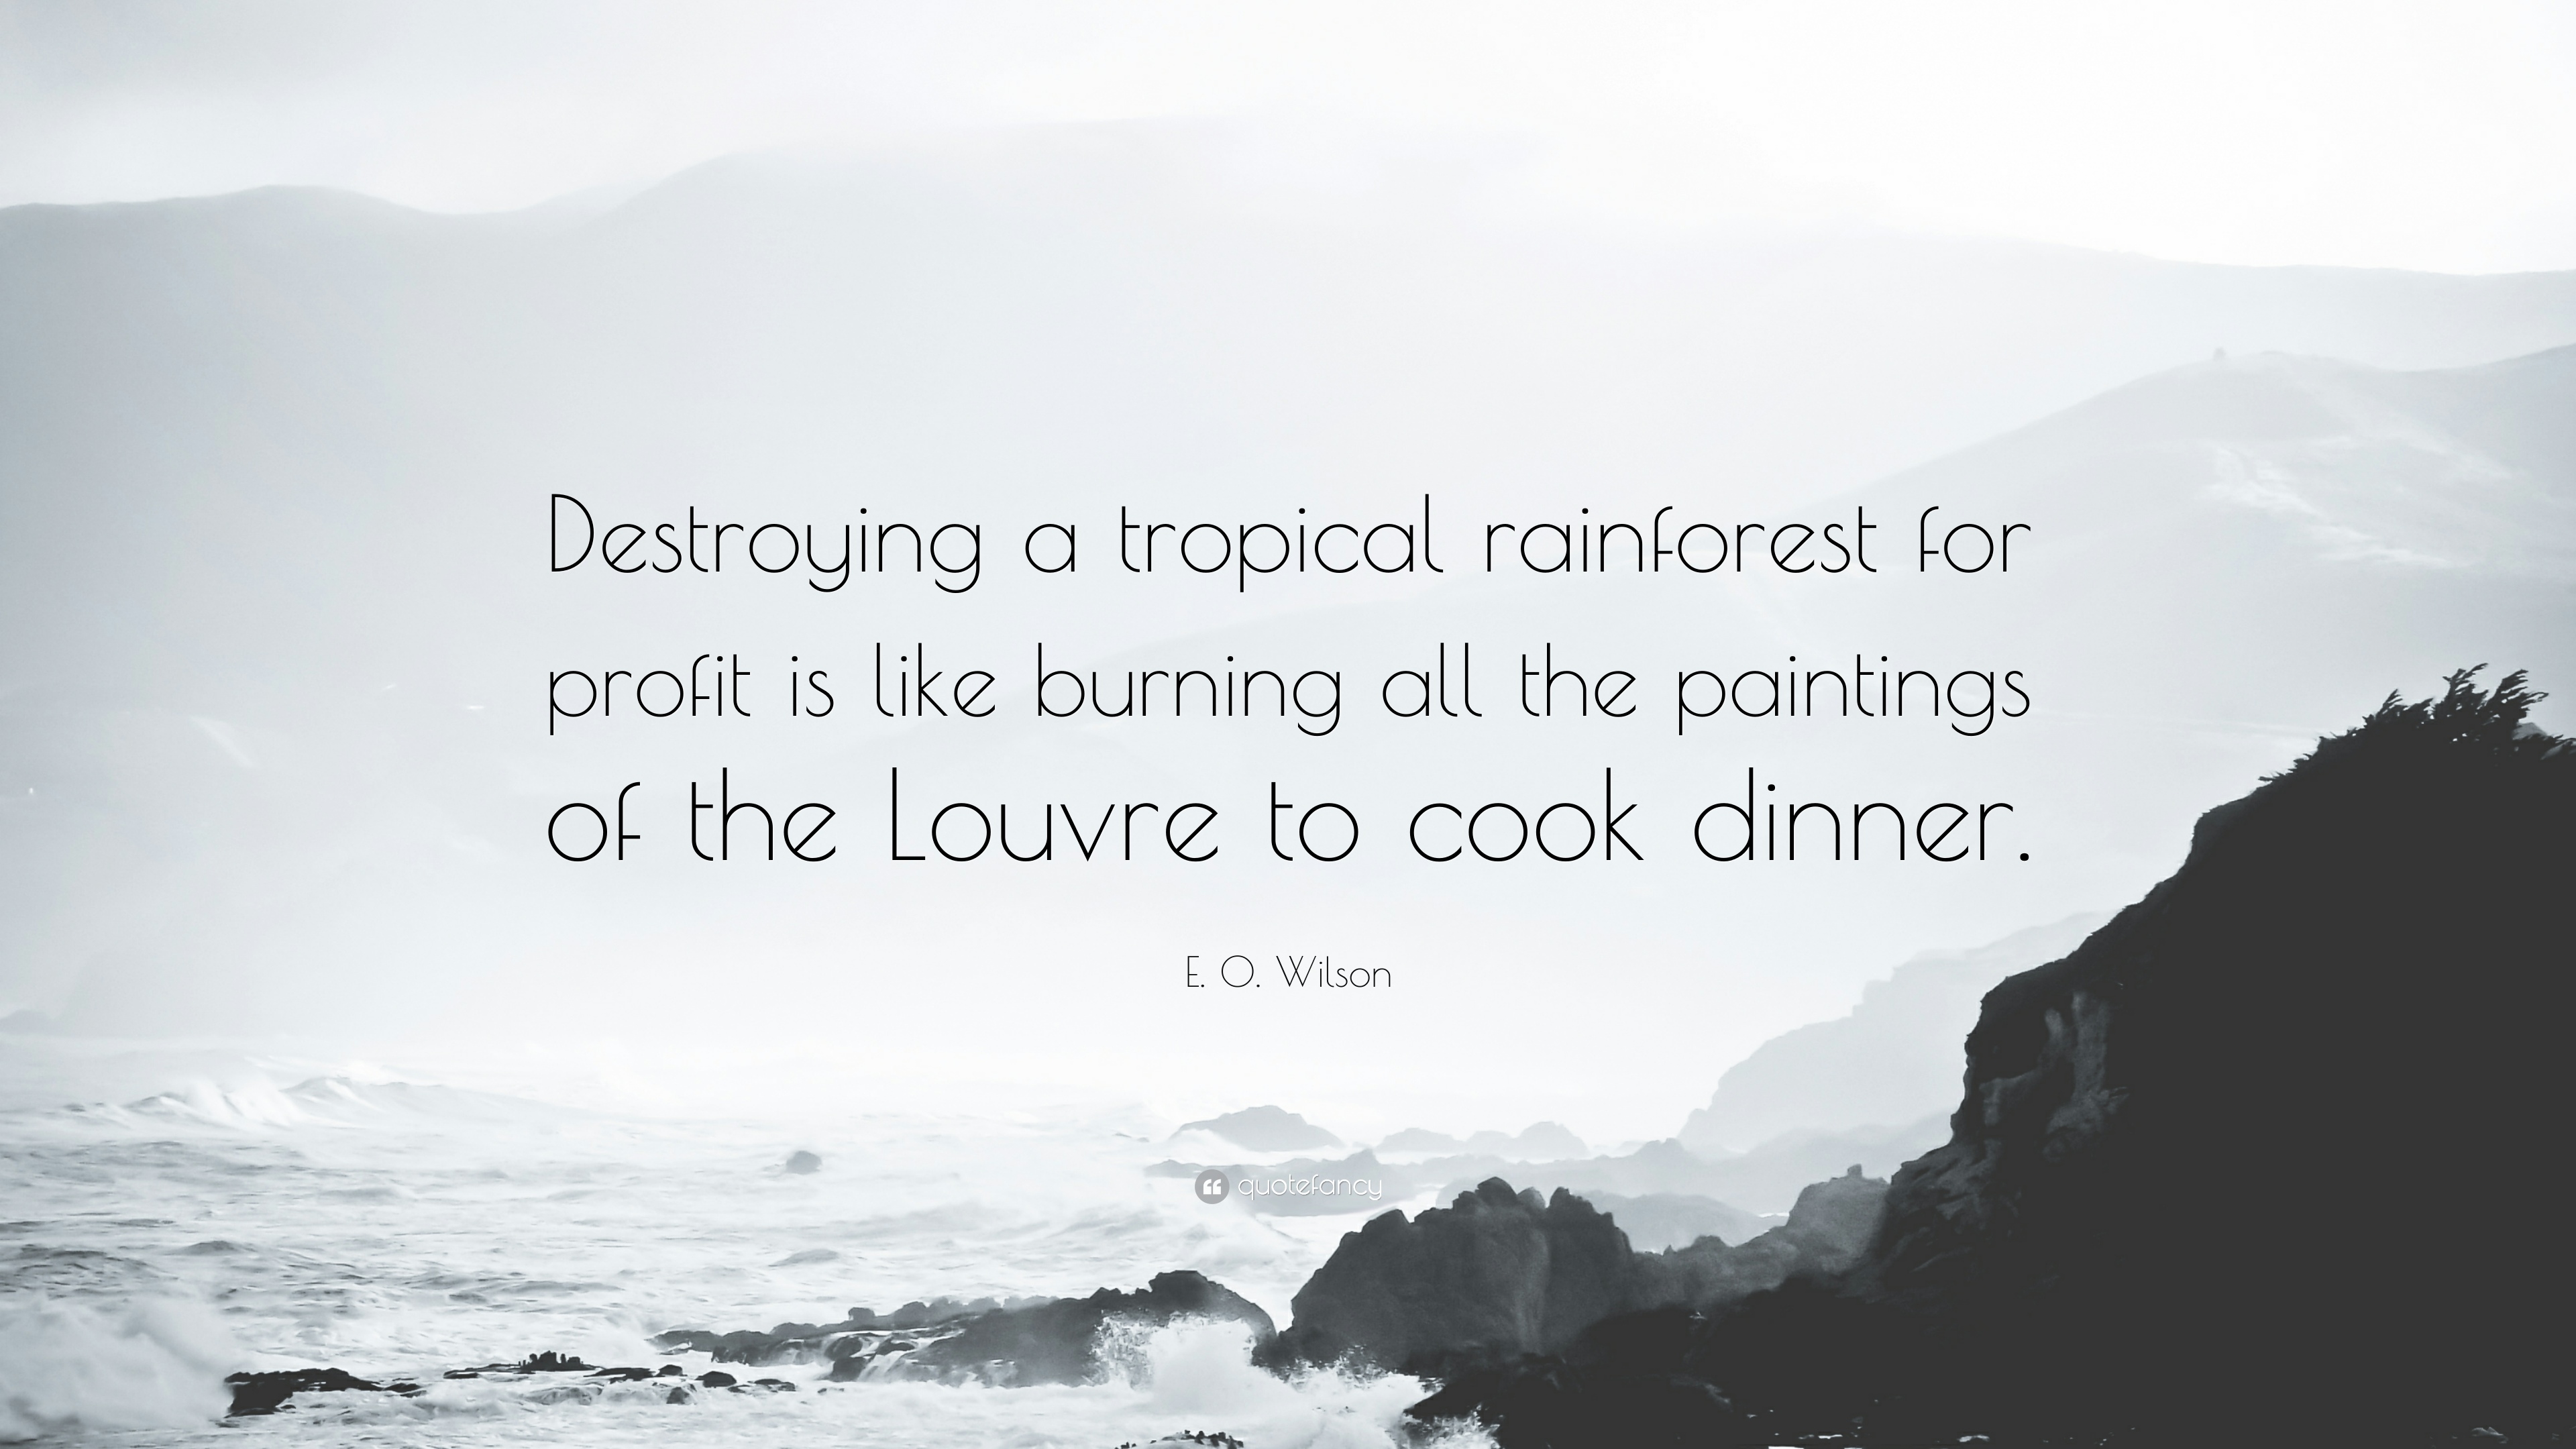 E. O. Wilson Quote: “Destroying a tropical rainforest for profit is